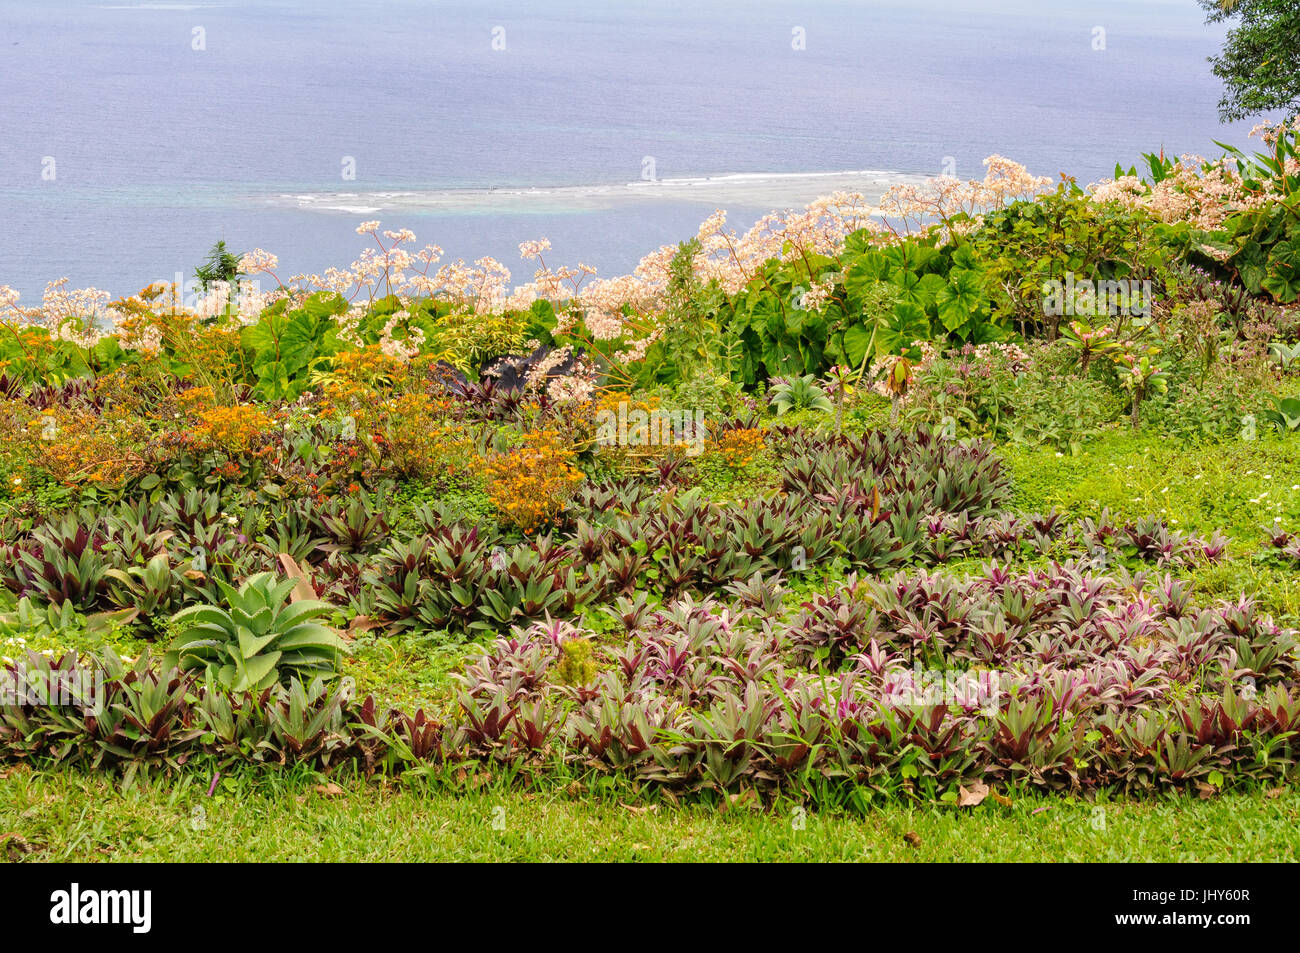 The Summit Gardens are the largest tropical gardens in the South Pacific - Port Vila, Efate Island, Vanuatu Stock Photo